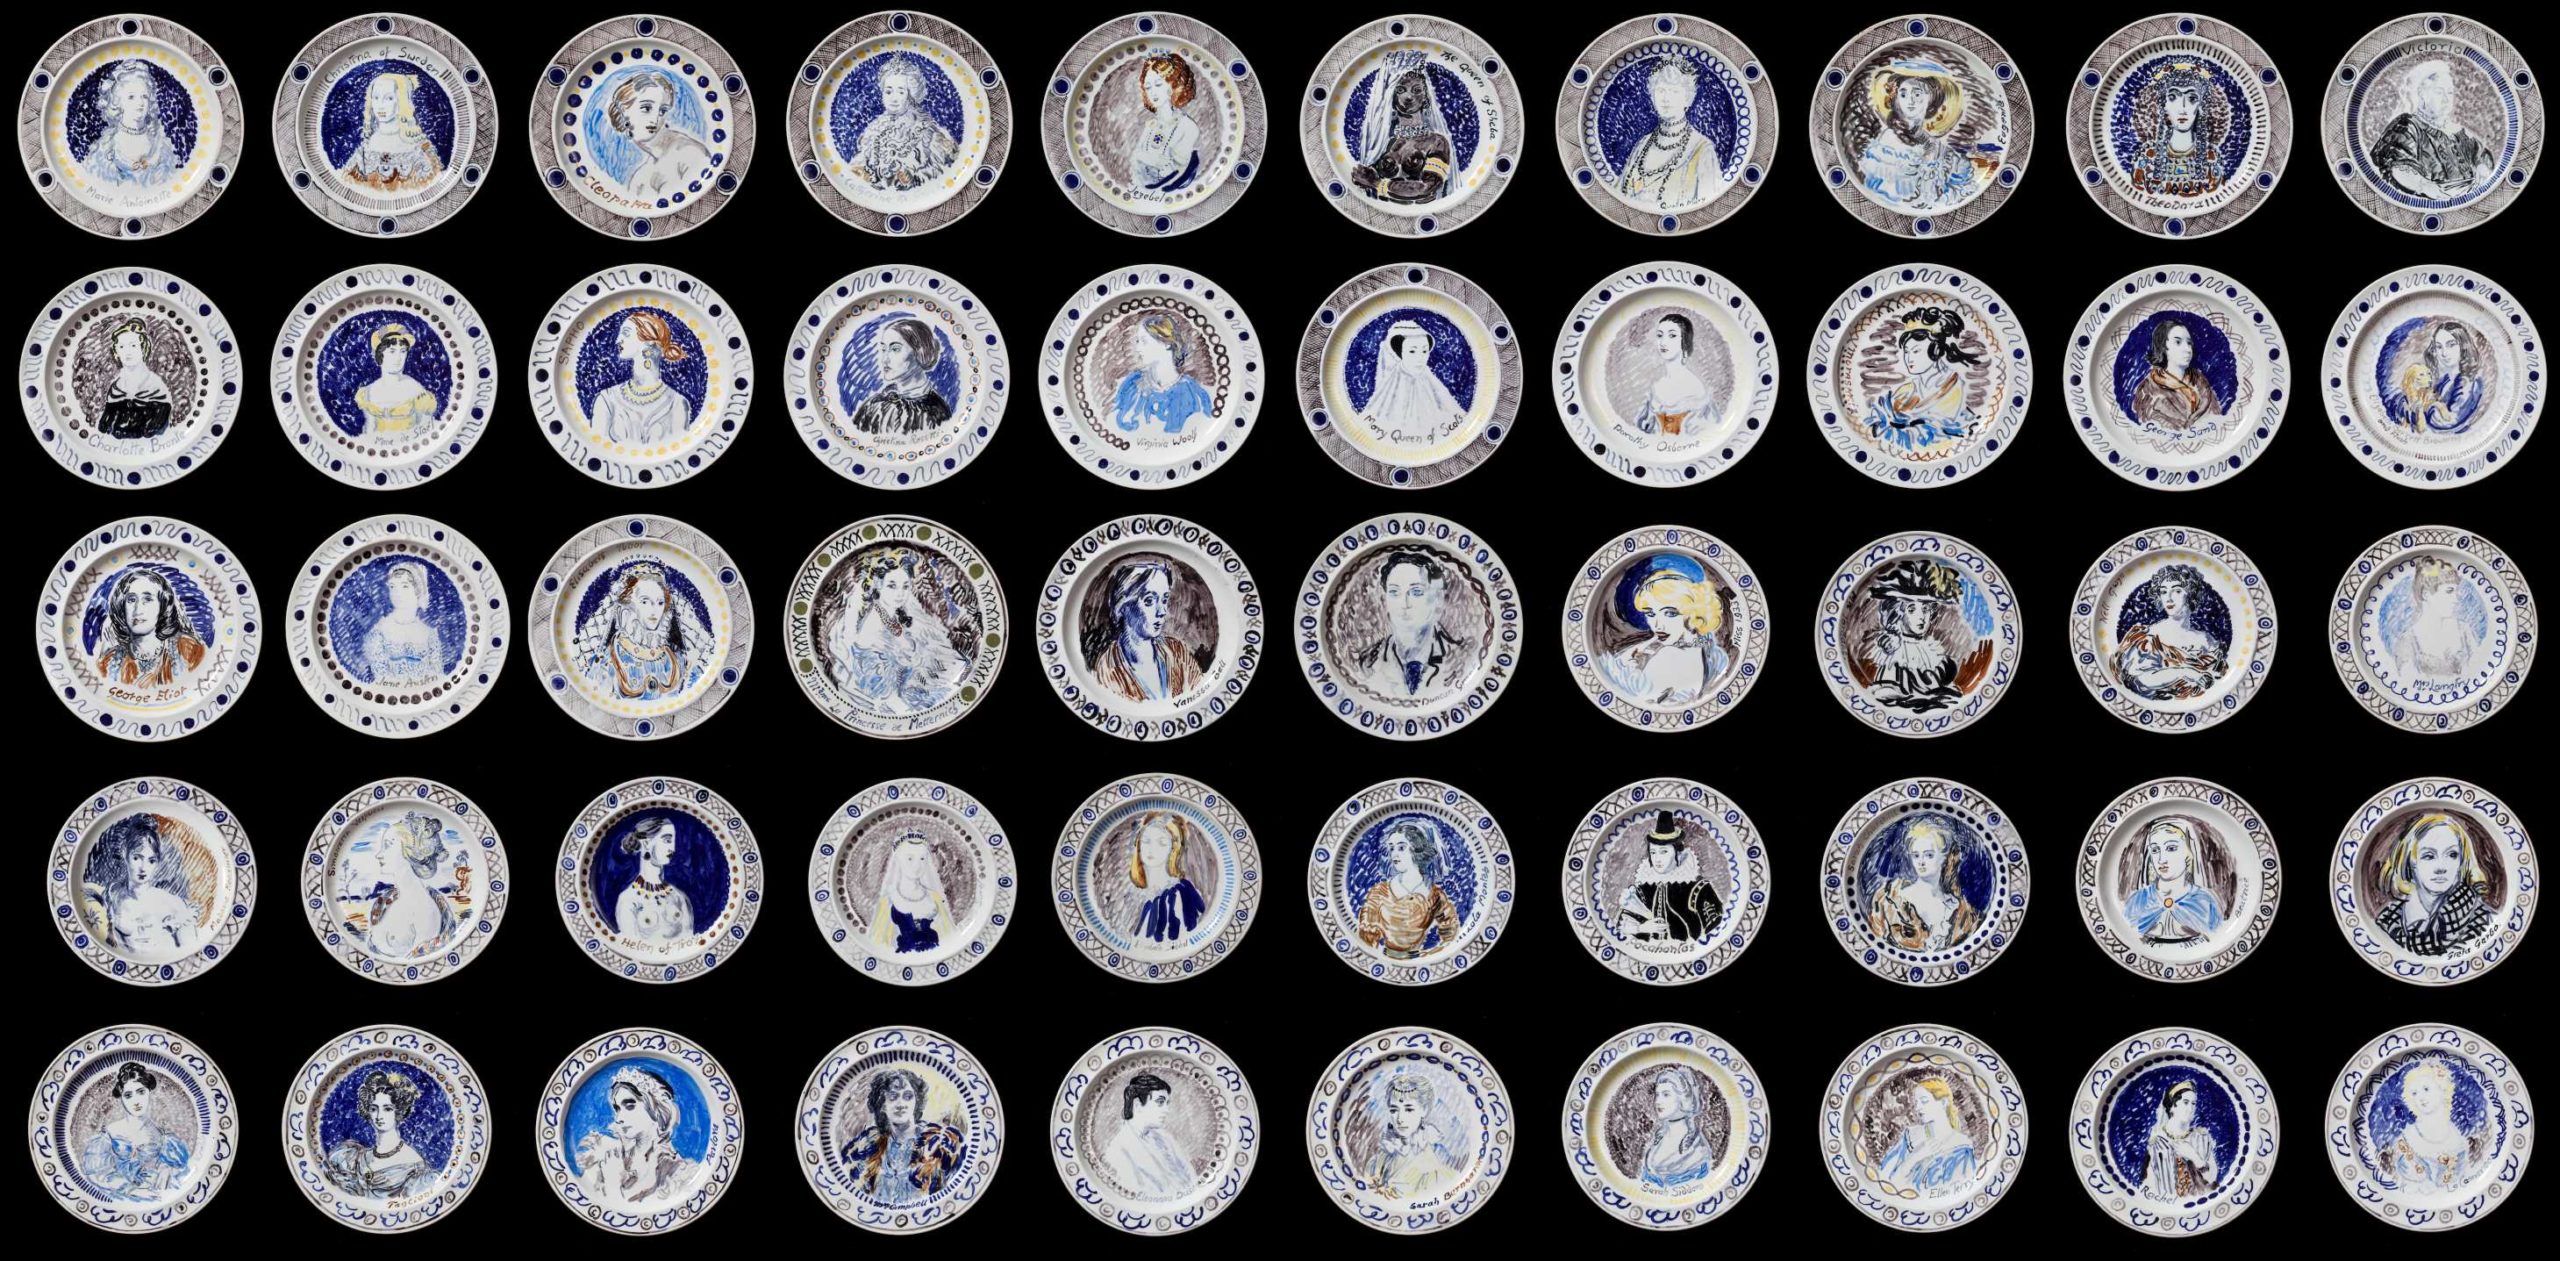 All 50 plates of the Famous Women Dinner Service lined up in rows. Portraits of different women are on each plate painted in shades of white and blue.